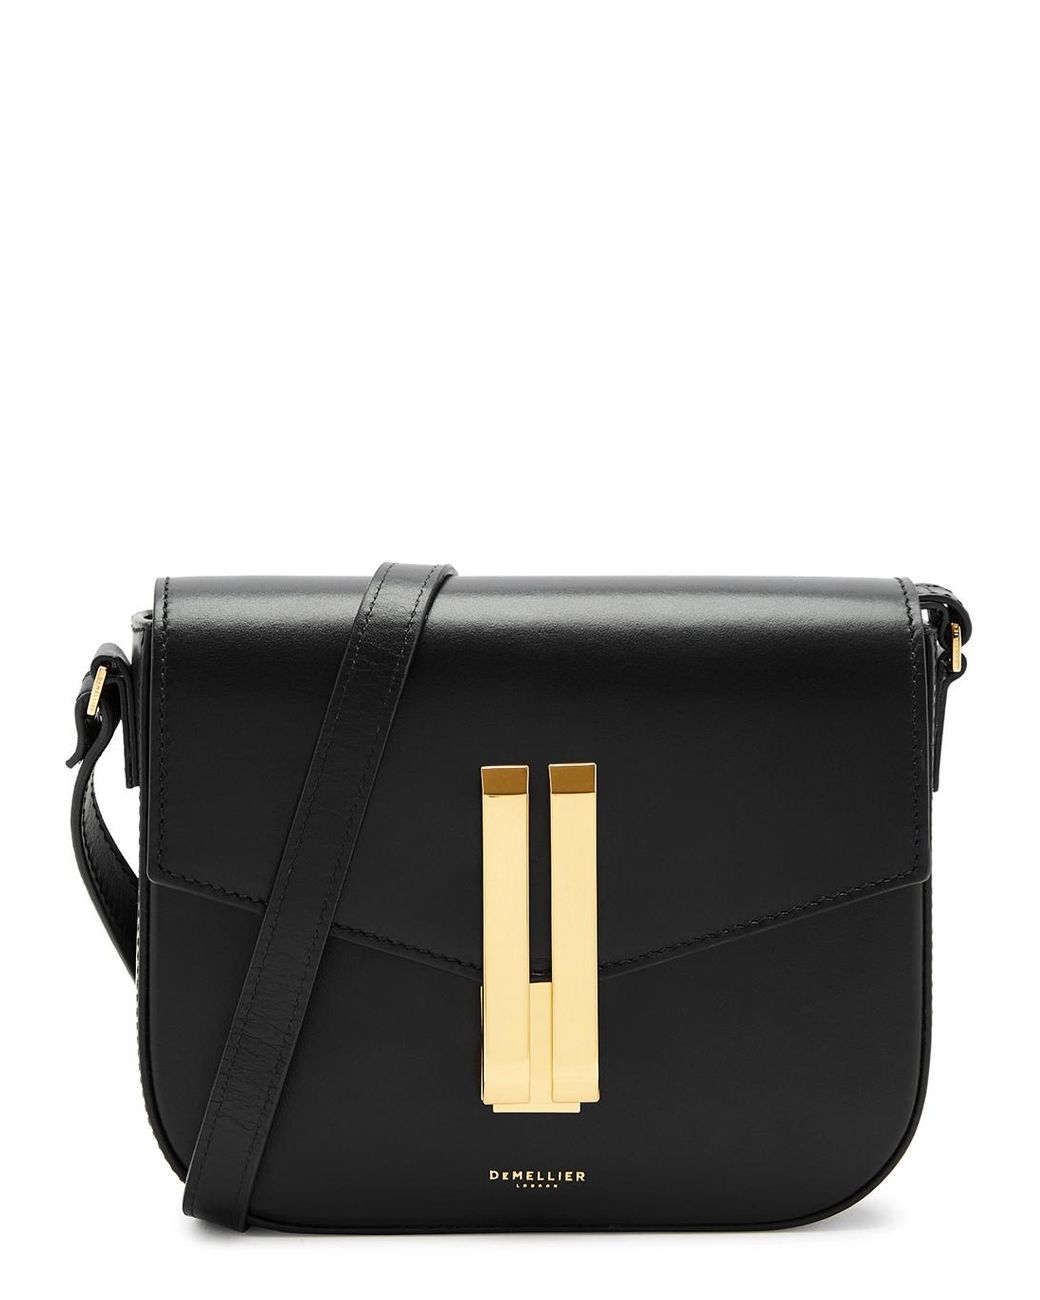 DeMellier The Vancouver Small Leather Cross-body Bag in Black | Lyst UK